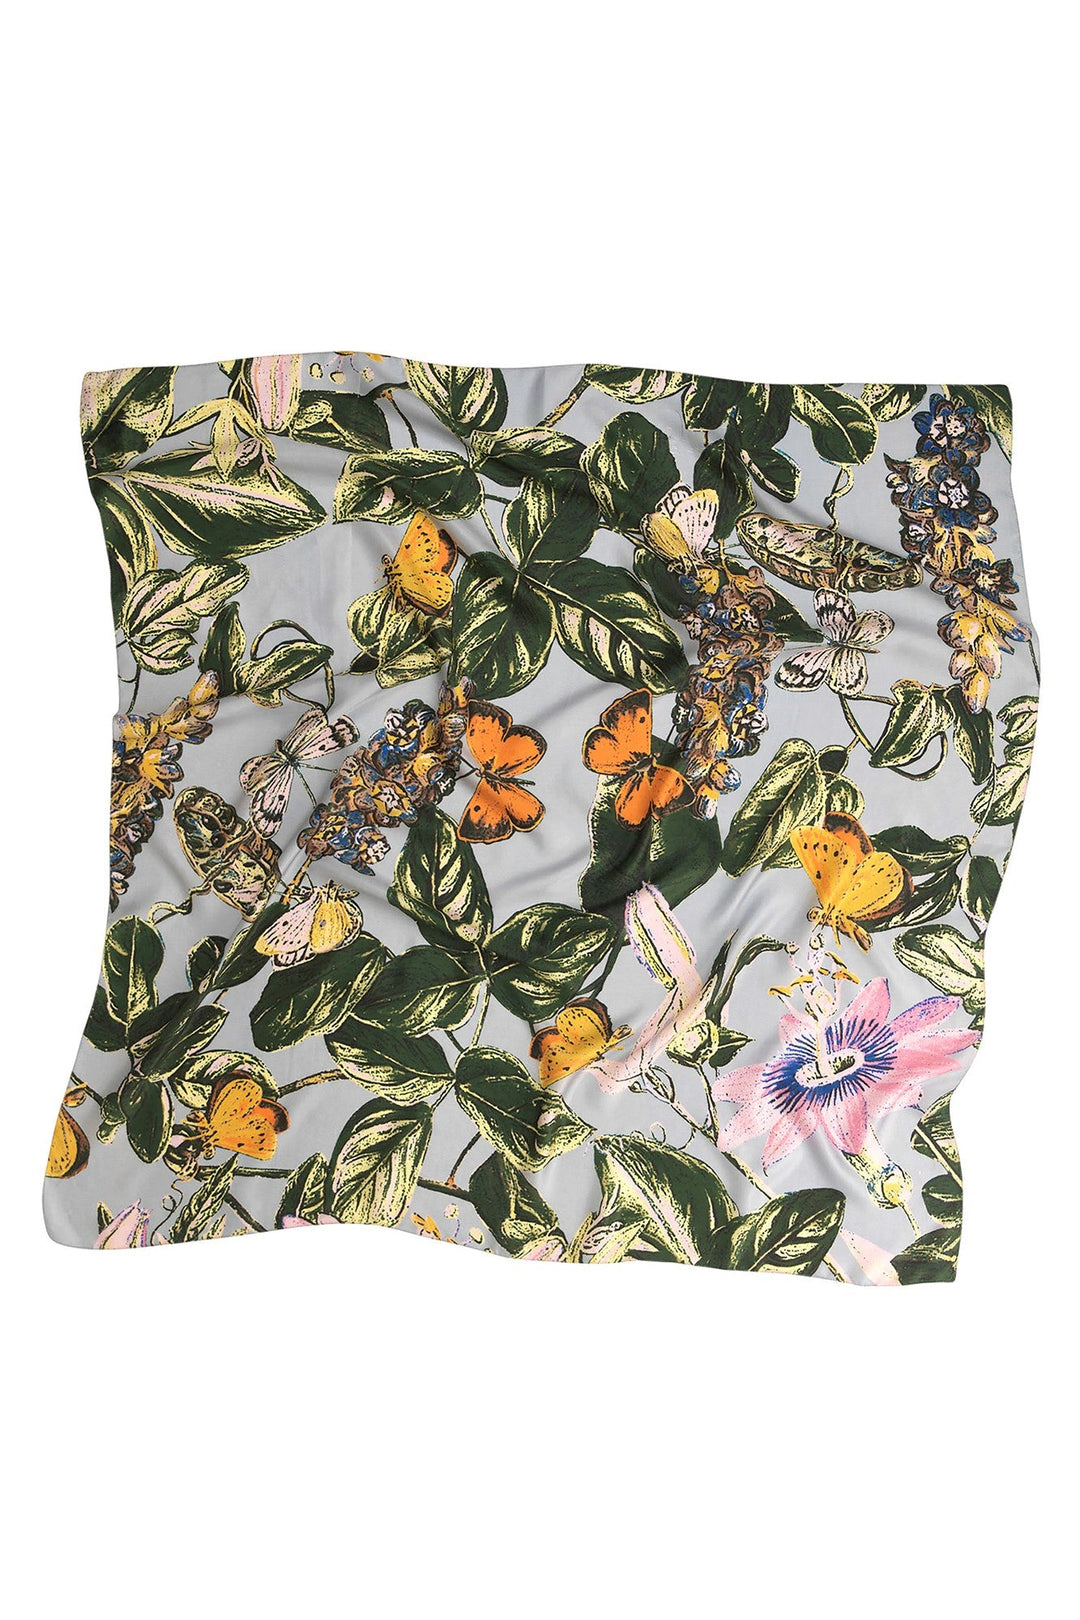 Marianne North Chilli Plant Silk Scarf- 100% silk, 100% hand screen printed and a whole 100cm x 100cm of print, this silk scarf oozes luxury whether you wear it knotted around your neck, as a headscarf or fastened around the handle of your favourite handbag.